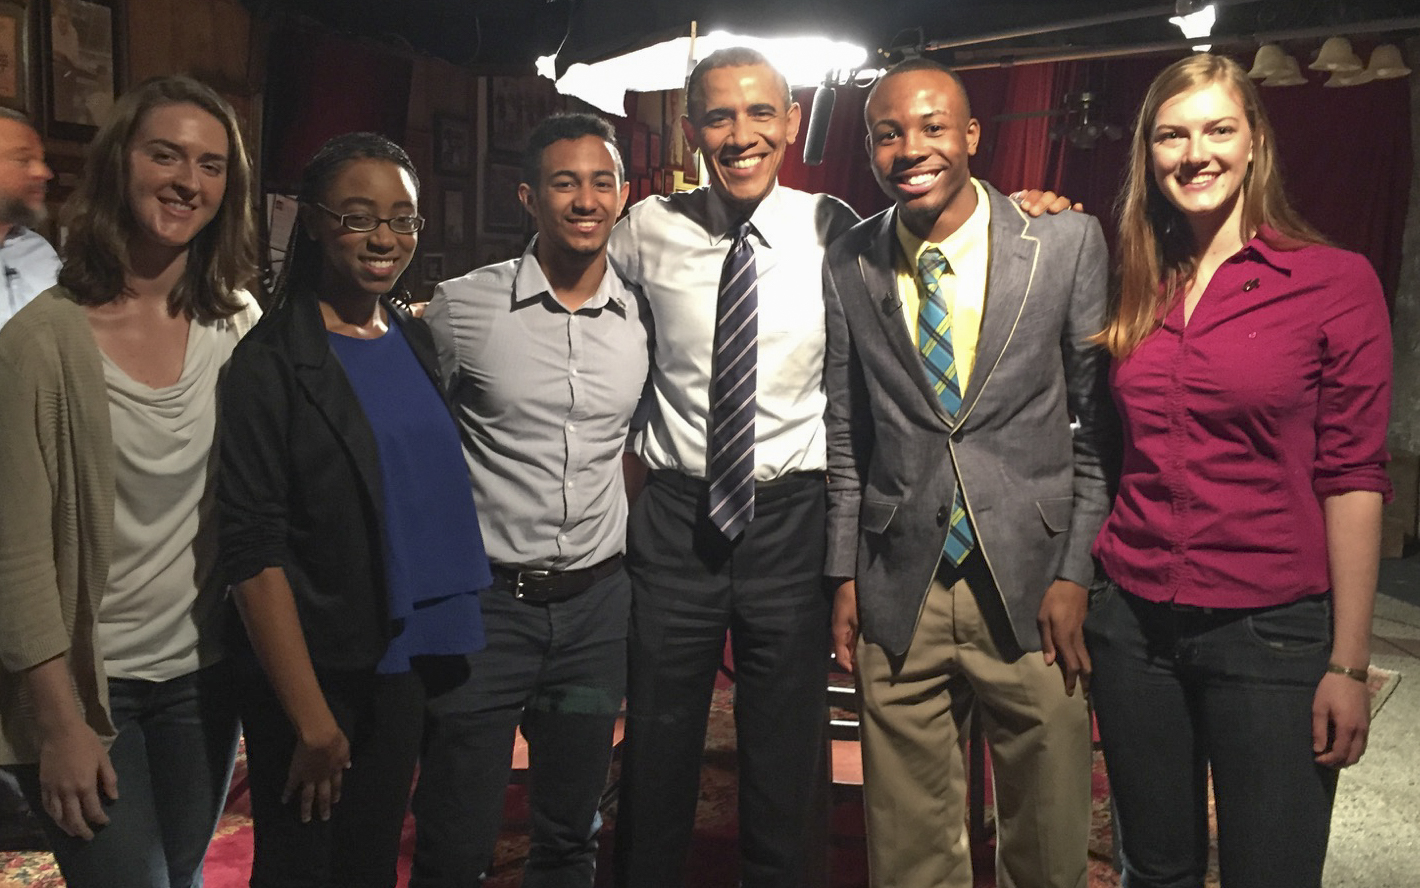 Lauren Milner (far left), Gabriel Galarza (gray shirt) and Laura O'Connell (far right) were among five students invited to a roundtable hosted by President Barack Obama on March 10, 2015.